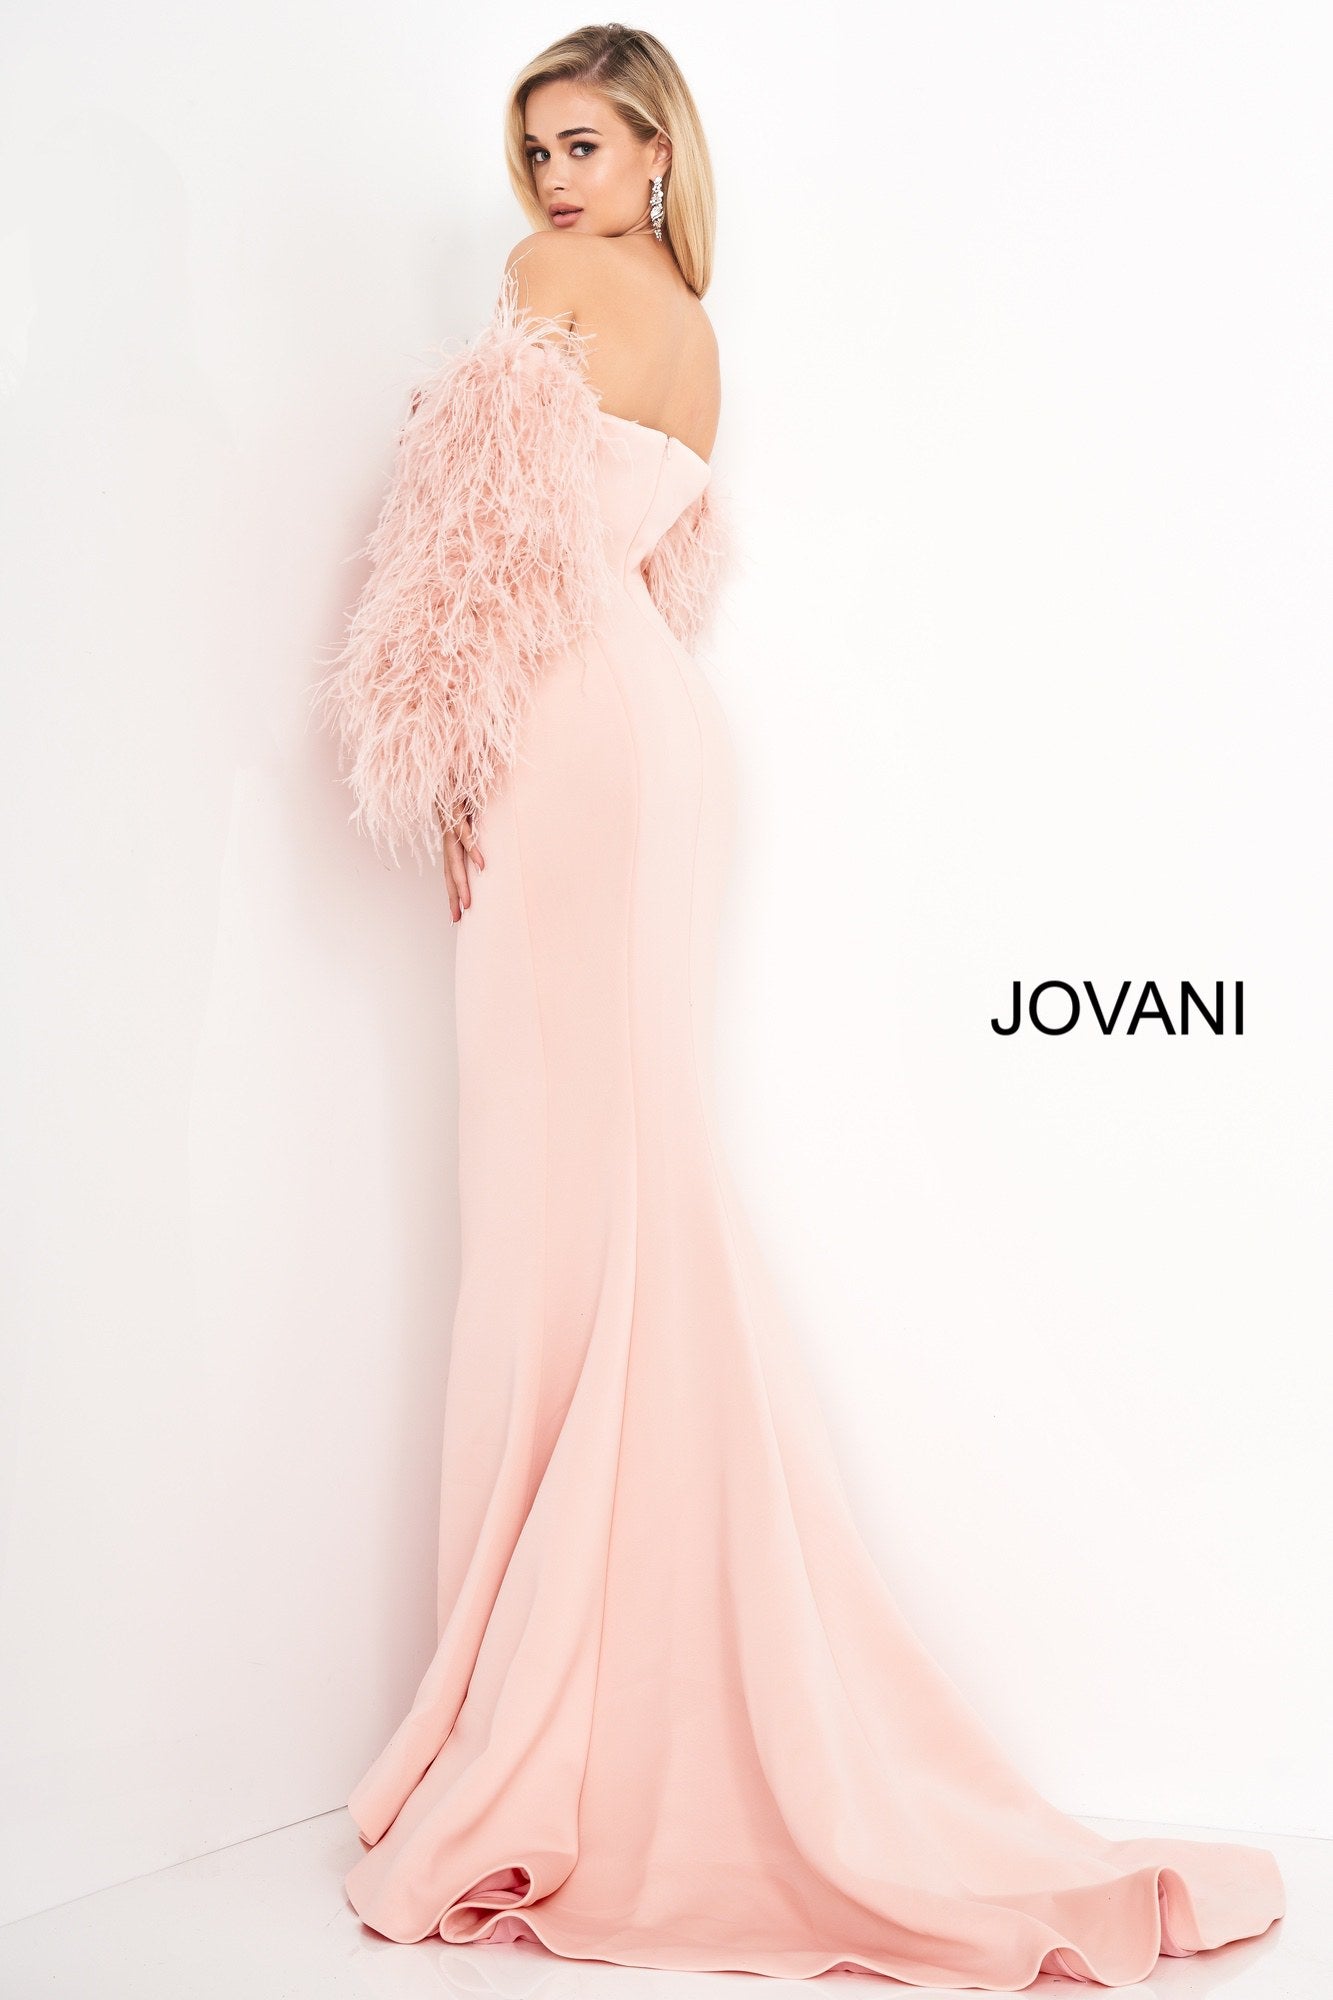 Jovani 1226 is a Long Fitted Mermaid Scuba Formal Evening Gown. This Straight neckline with Long Off the Shoulder Feather Sleeves. This Fit & Flare Wedding Dress Features a Lush Sweeping train. Great Red Carpet or formal event gown. Great for a wedding guest dress or mother of the bride gown. Stretch scuba fabric, form fitting silhouette, floor length with train, strapless bodice, straight neckline, ostrich feather sleeves.  Available Sizes: 00-24  Available Colors: black, blush, white, white/black